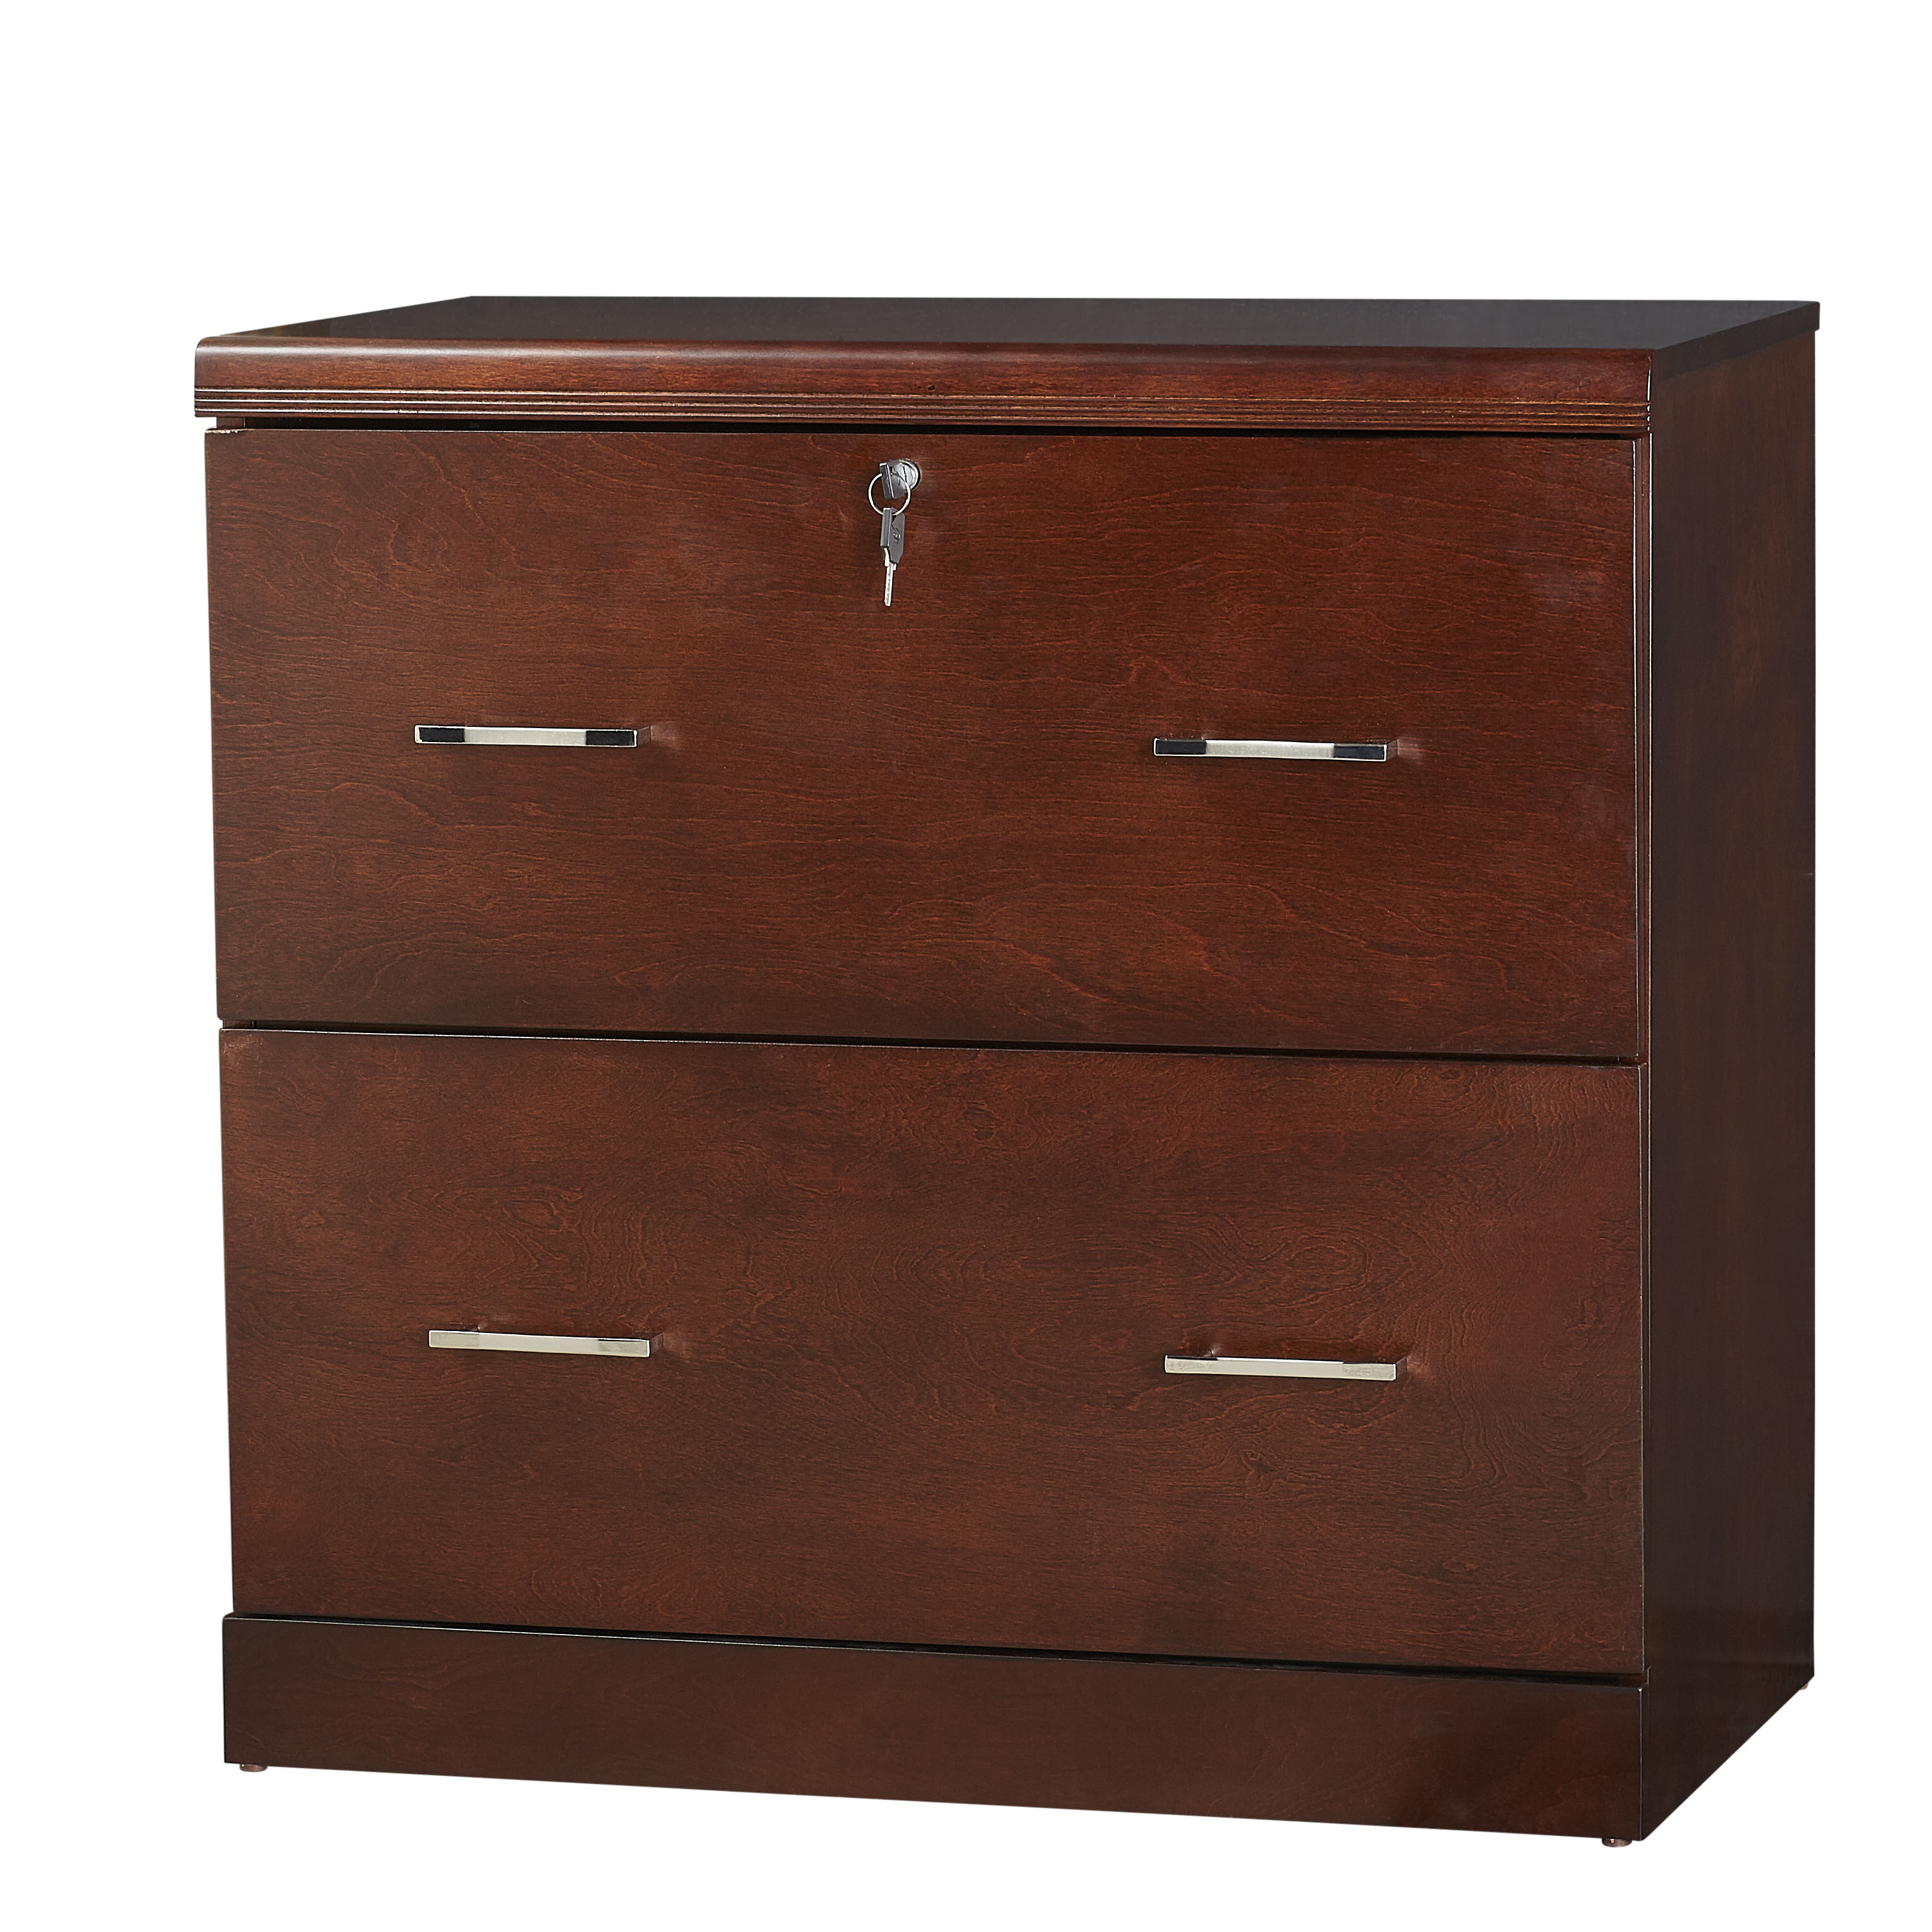 Better Homes and Gardens Wood 2 Drawer Espresso Lateral File Cabinet With Lock - image 1 of 5